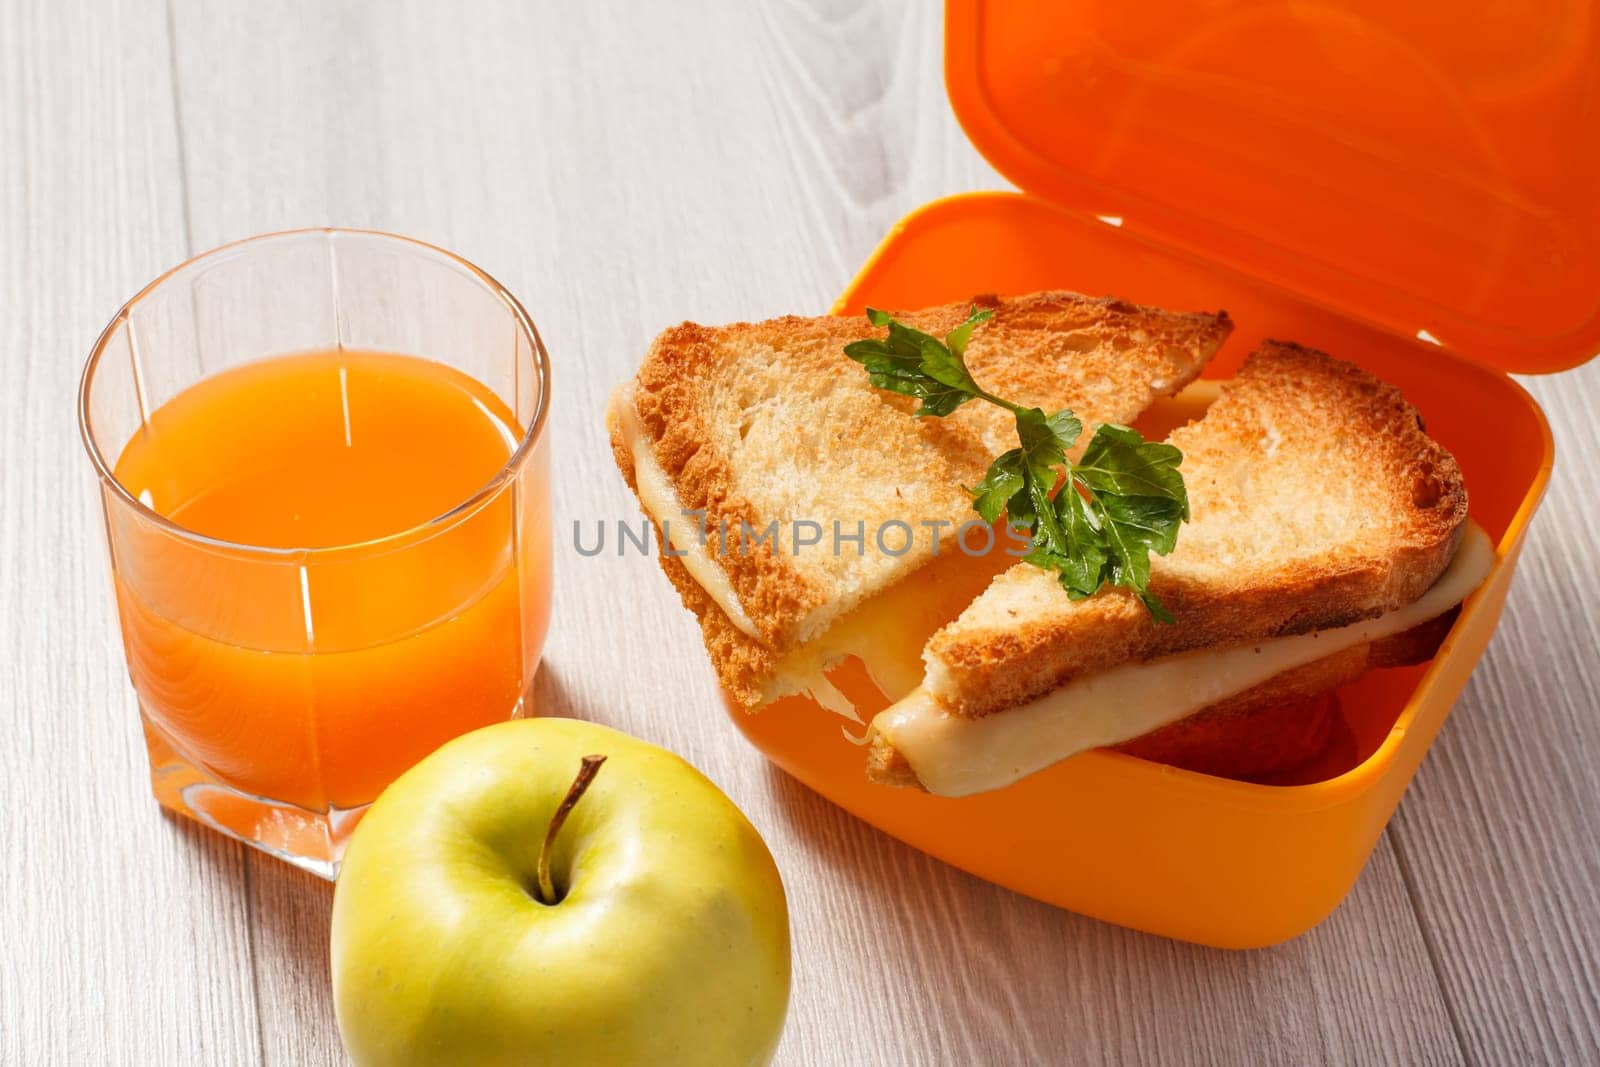 Yellow lunch box with toasted slices of bread, cheese and green parsley, green apple and glass of orange juice on wooden desk. by mvg6894